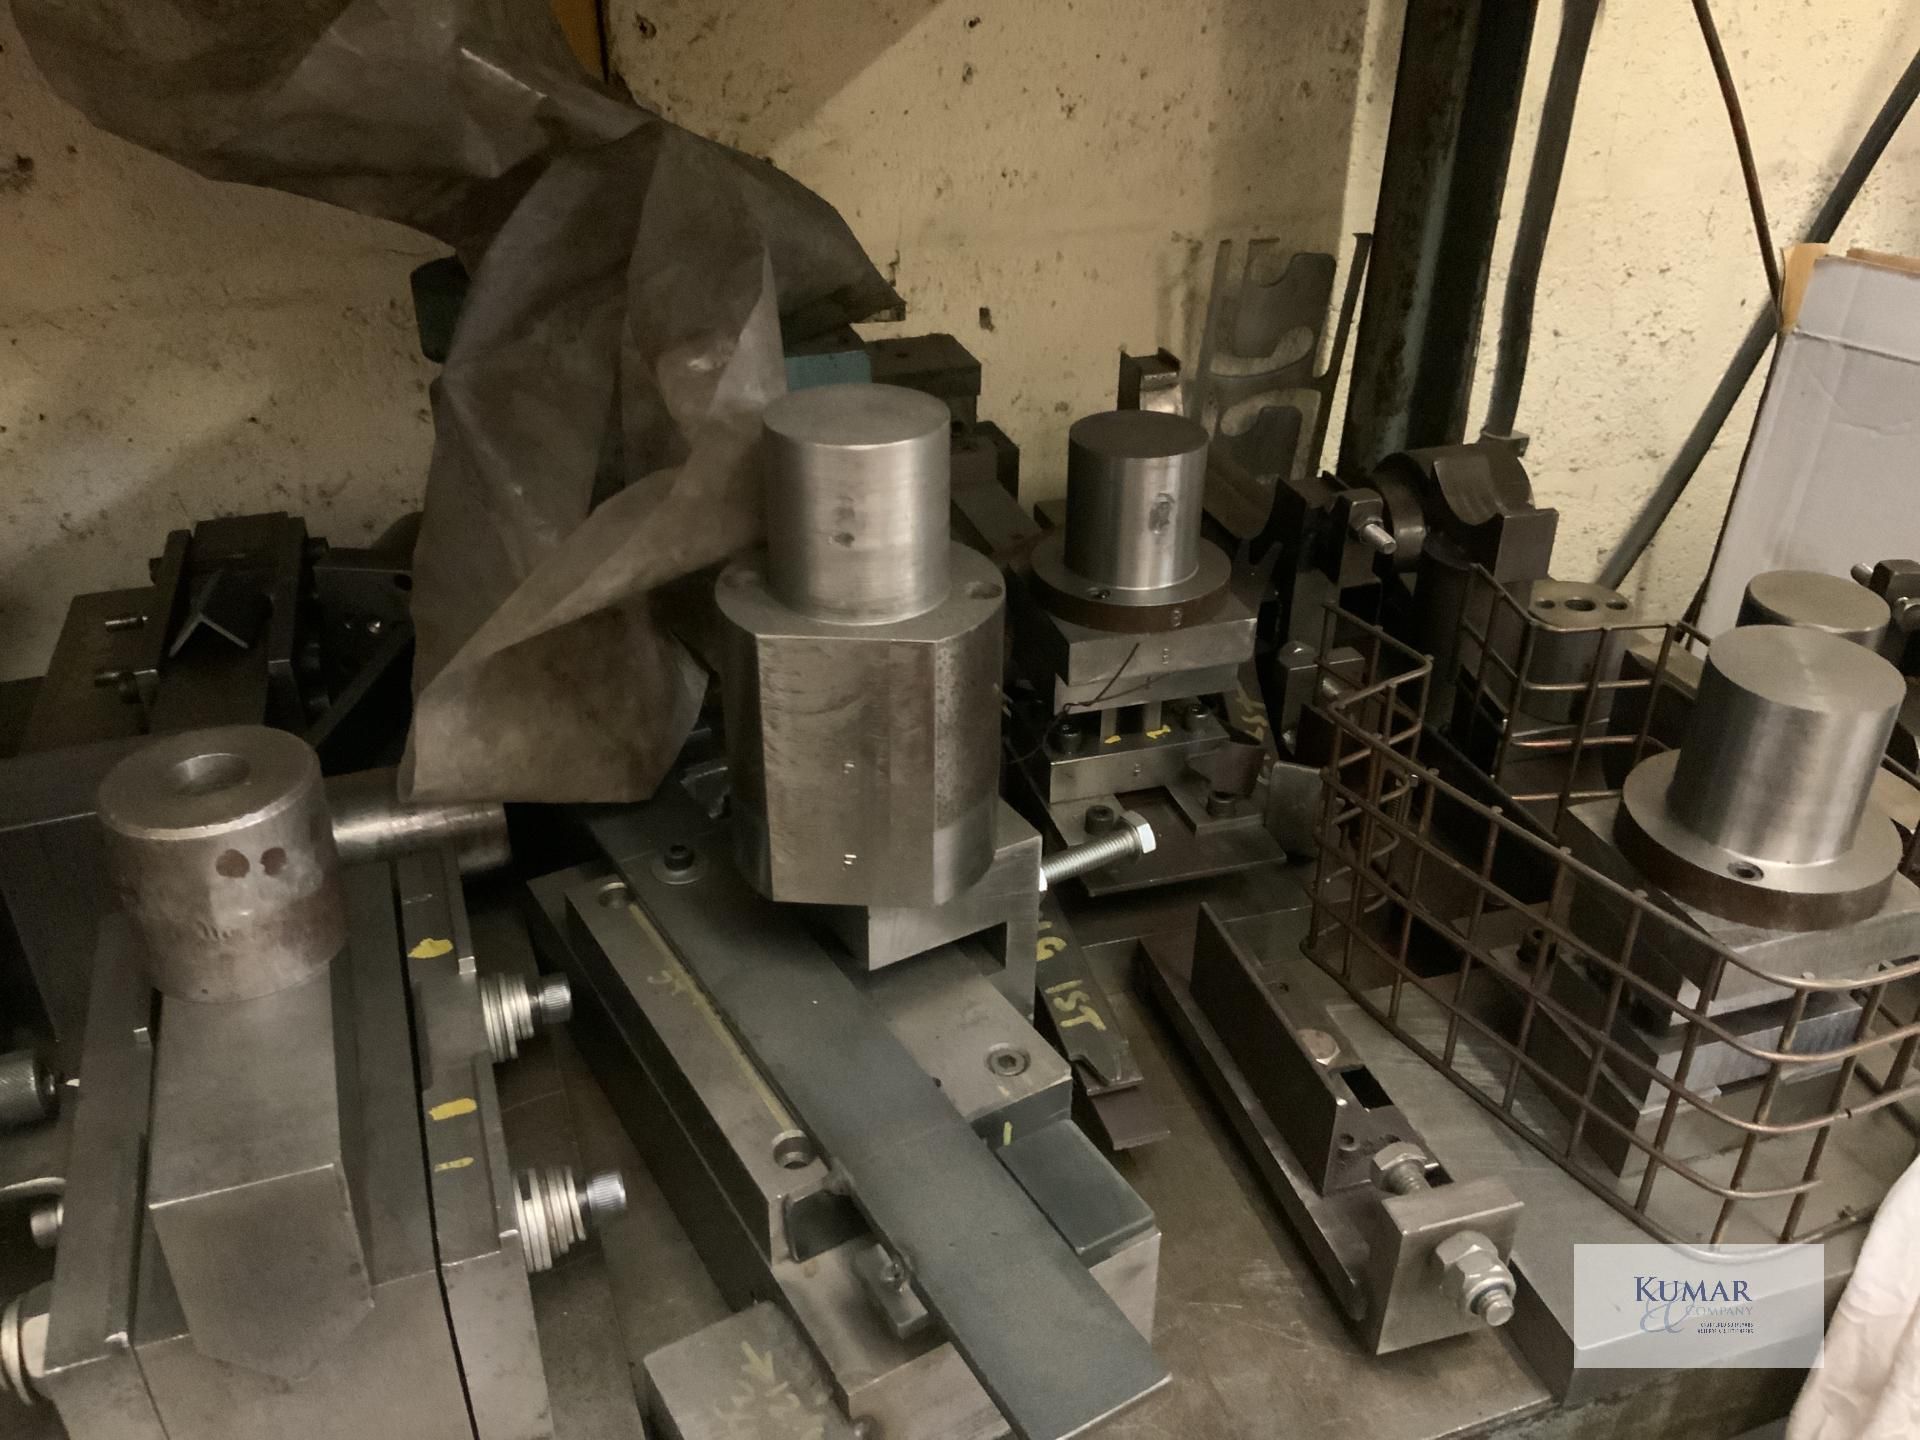 Machine tooling as imaged  Collection Day – Tuesday 27th February Unit 4 Goscote Industrial - Image 9 of 9